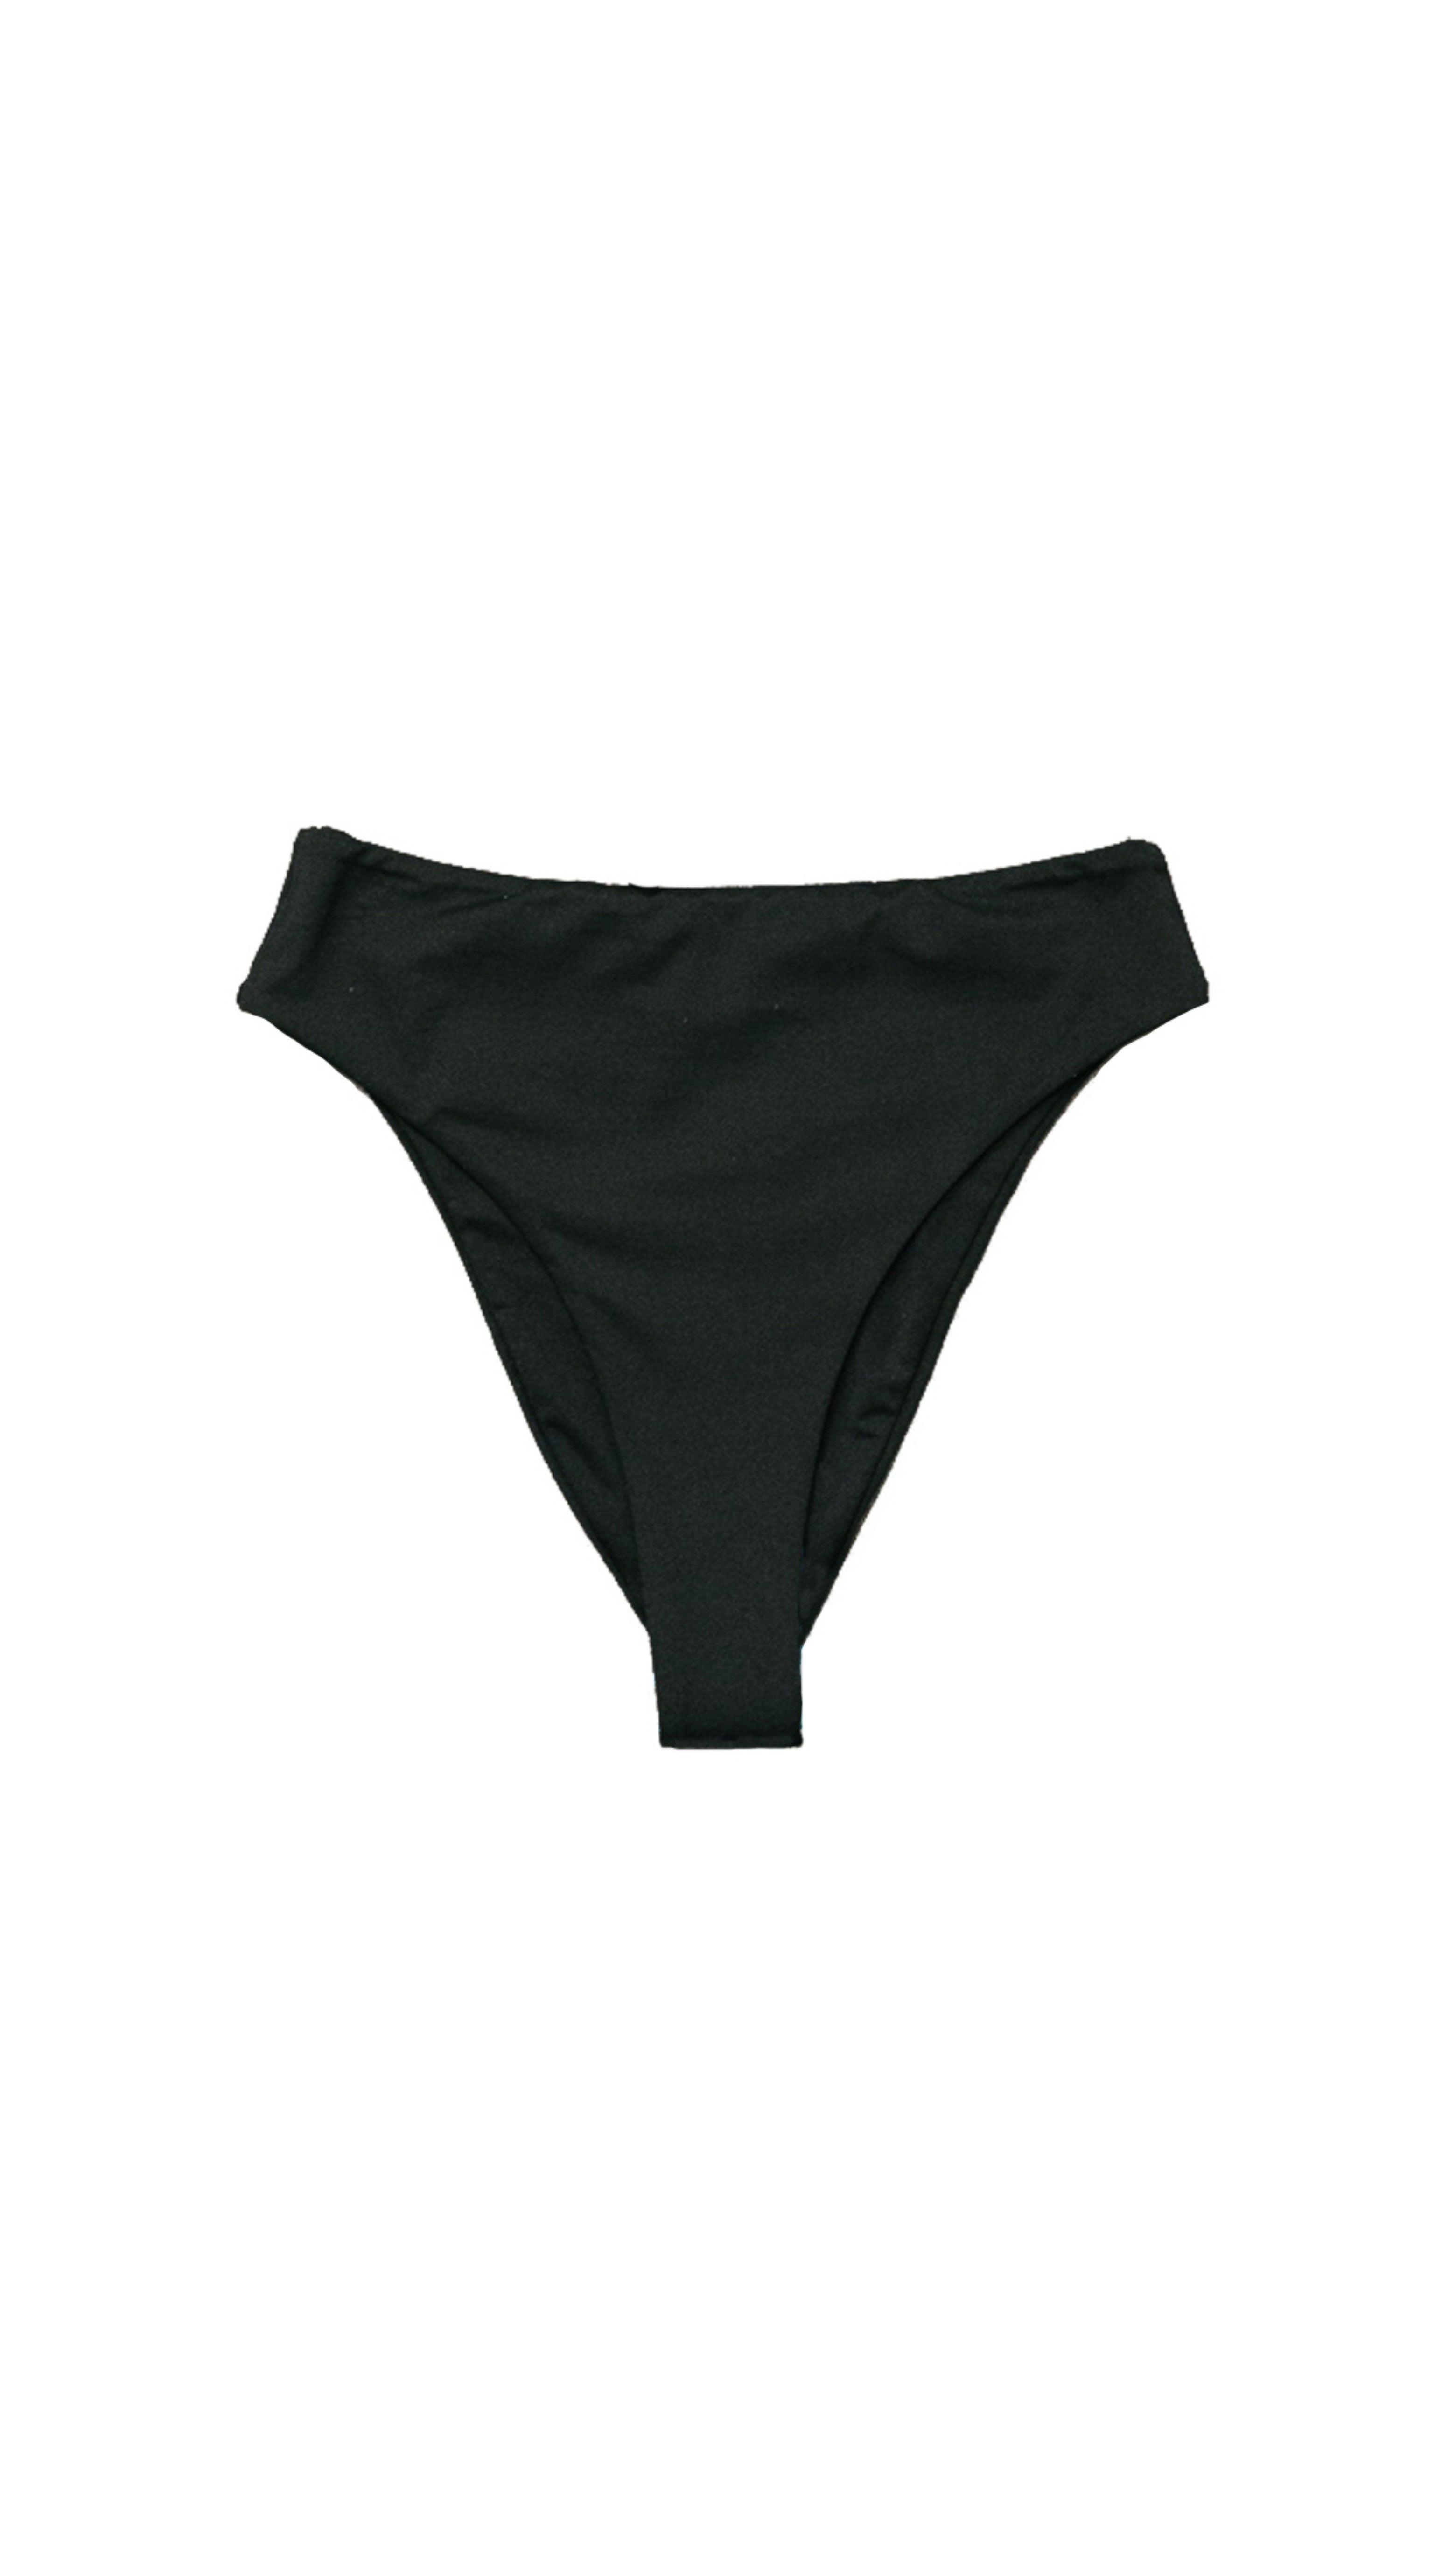 Leslie Amon High Waist Bikini Bottom in Black. Medium coverage and four way stretch material. Product photo from the front.